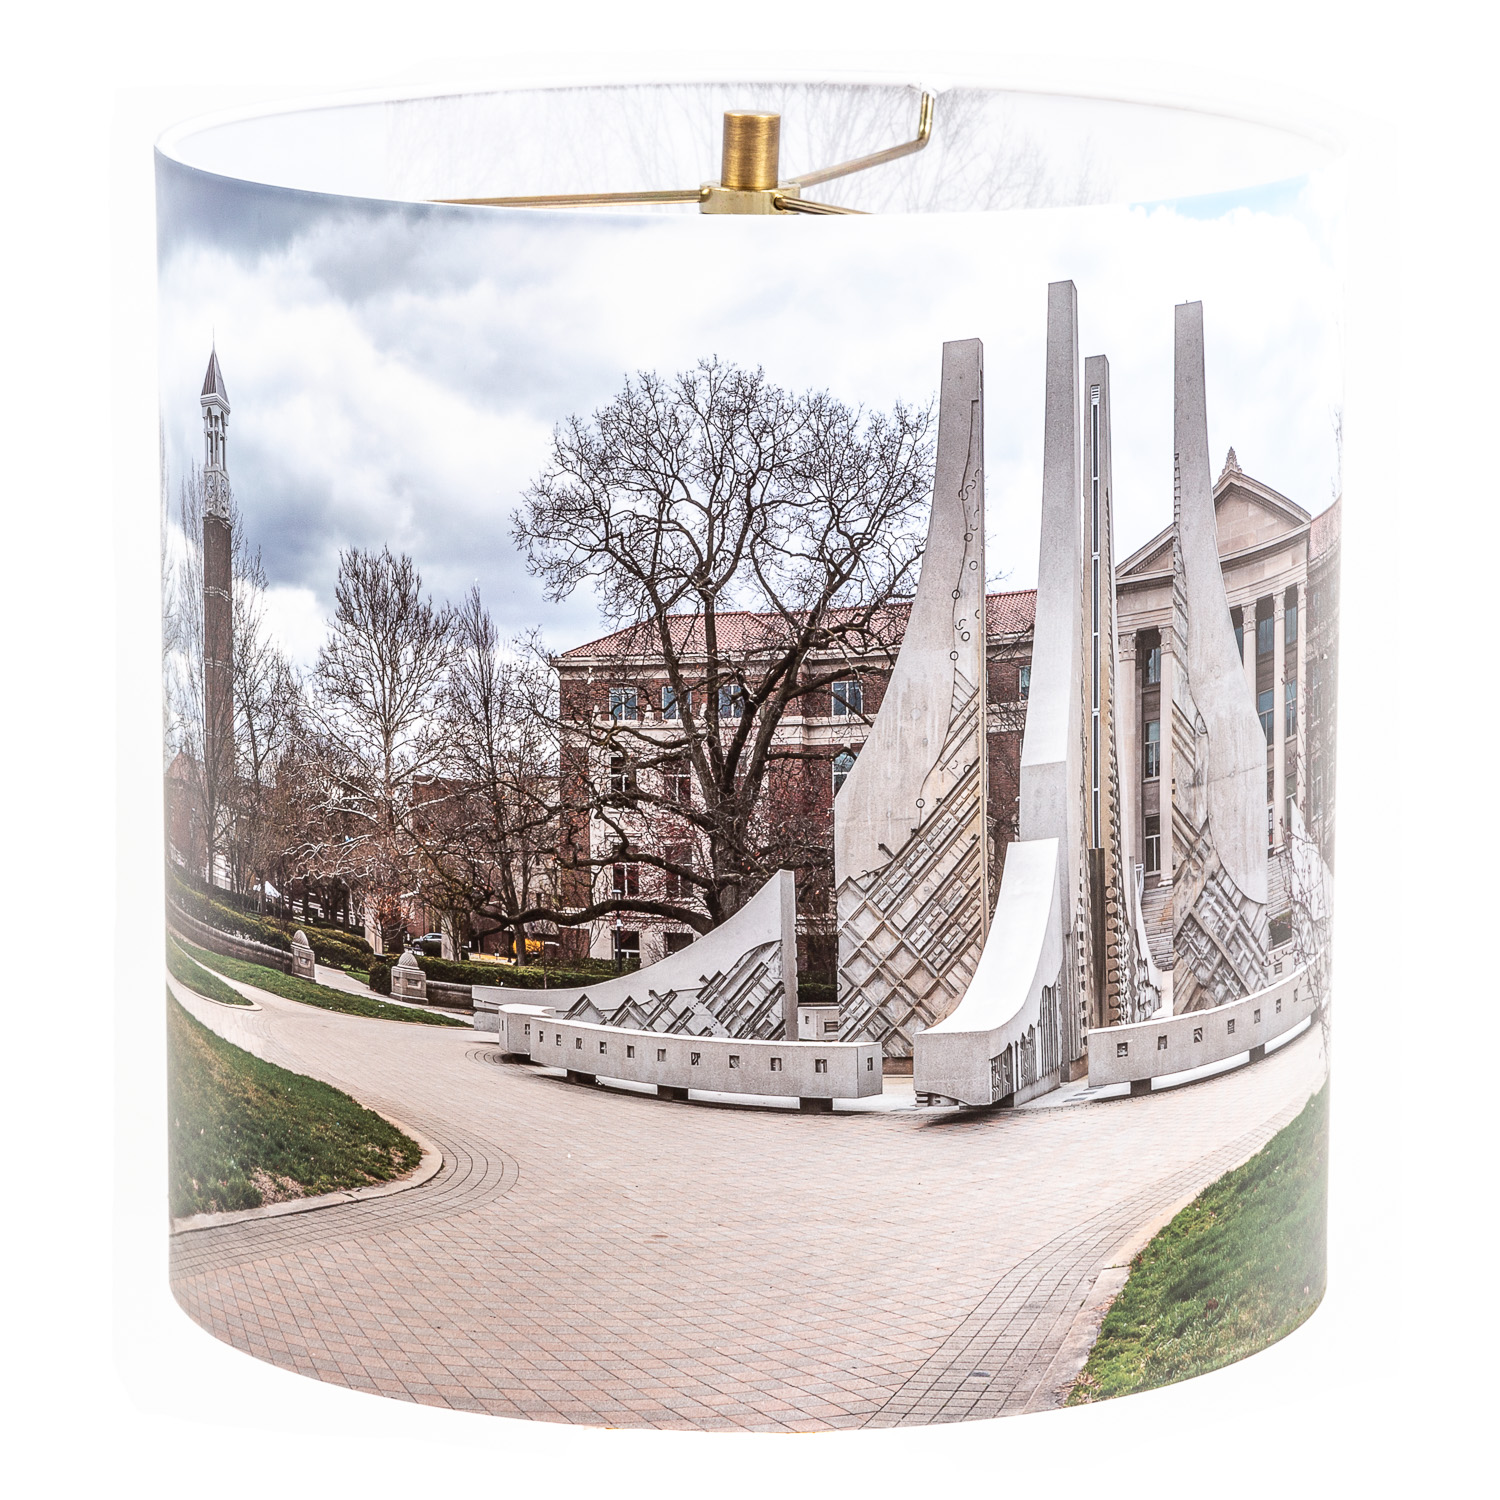 121: Purdue University fountain, bell tower, Hovde on Engineering mall -- Photo on Lamp shade by David Elmore